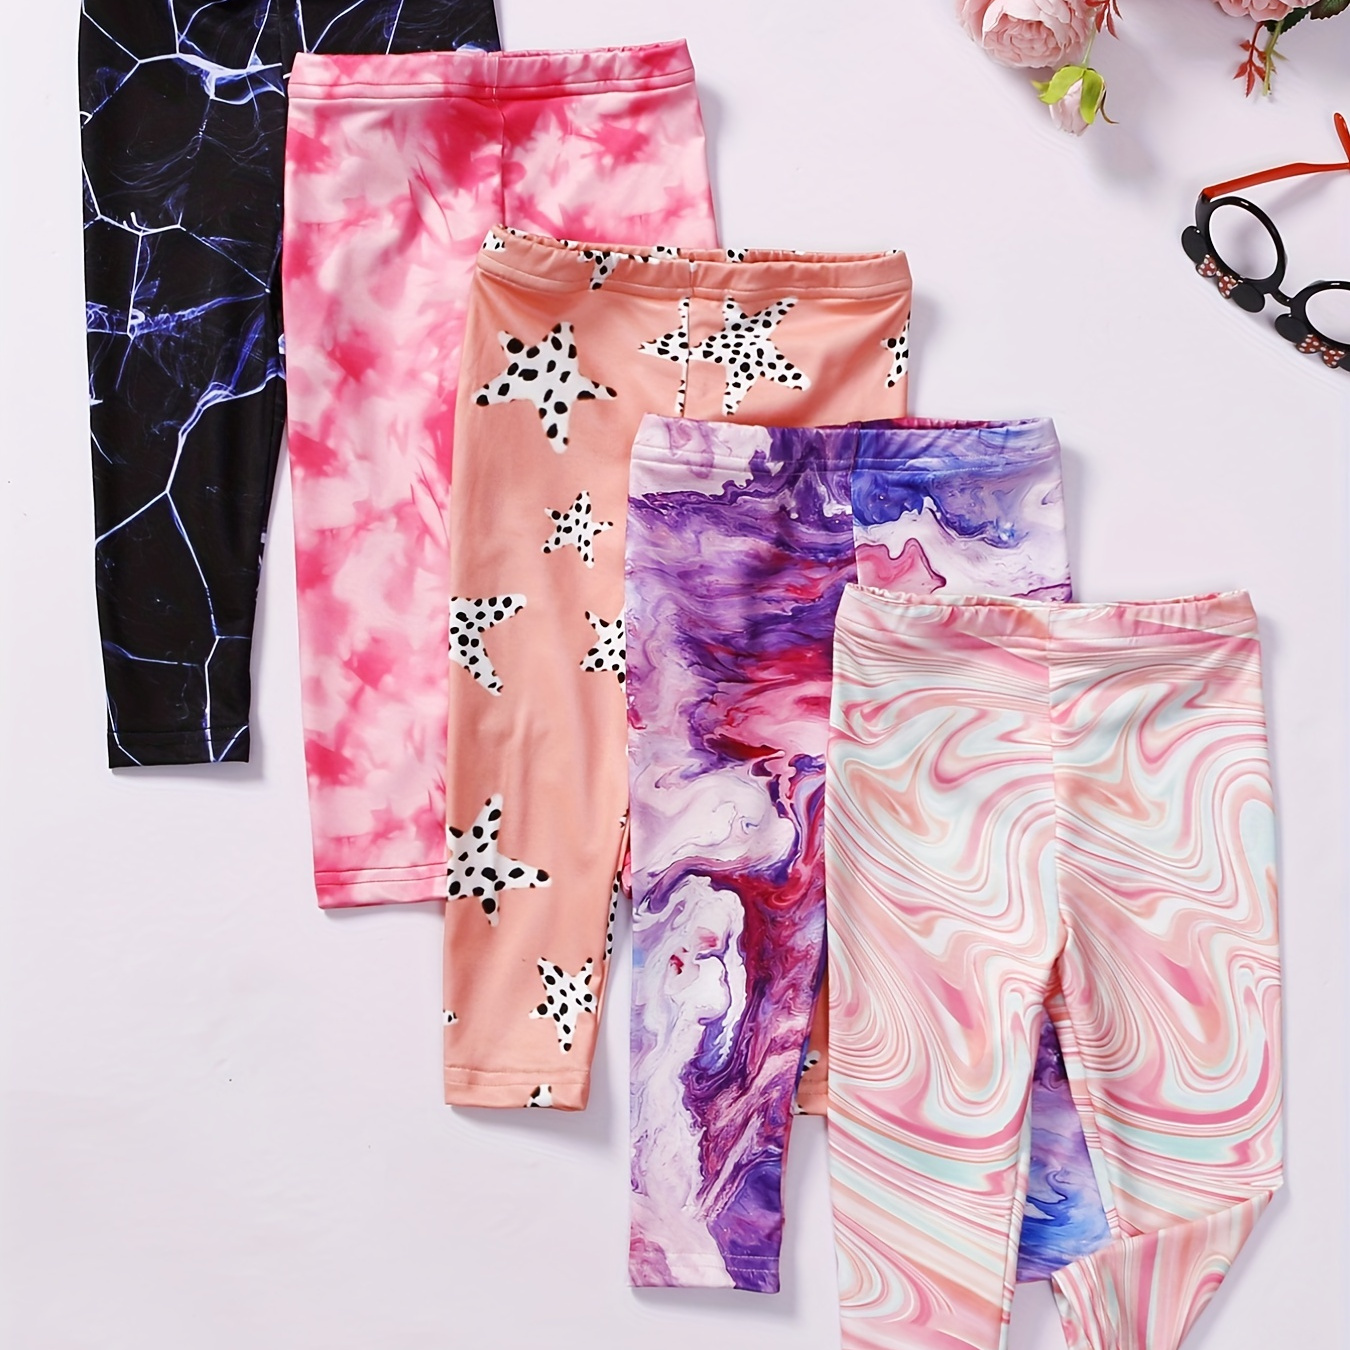 

5pcs Girls' Stretch Tie Dye Footless Legging Pants Elastic Waist Pants For A Fashionable Look